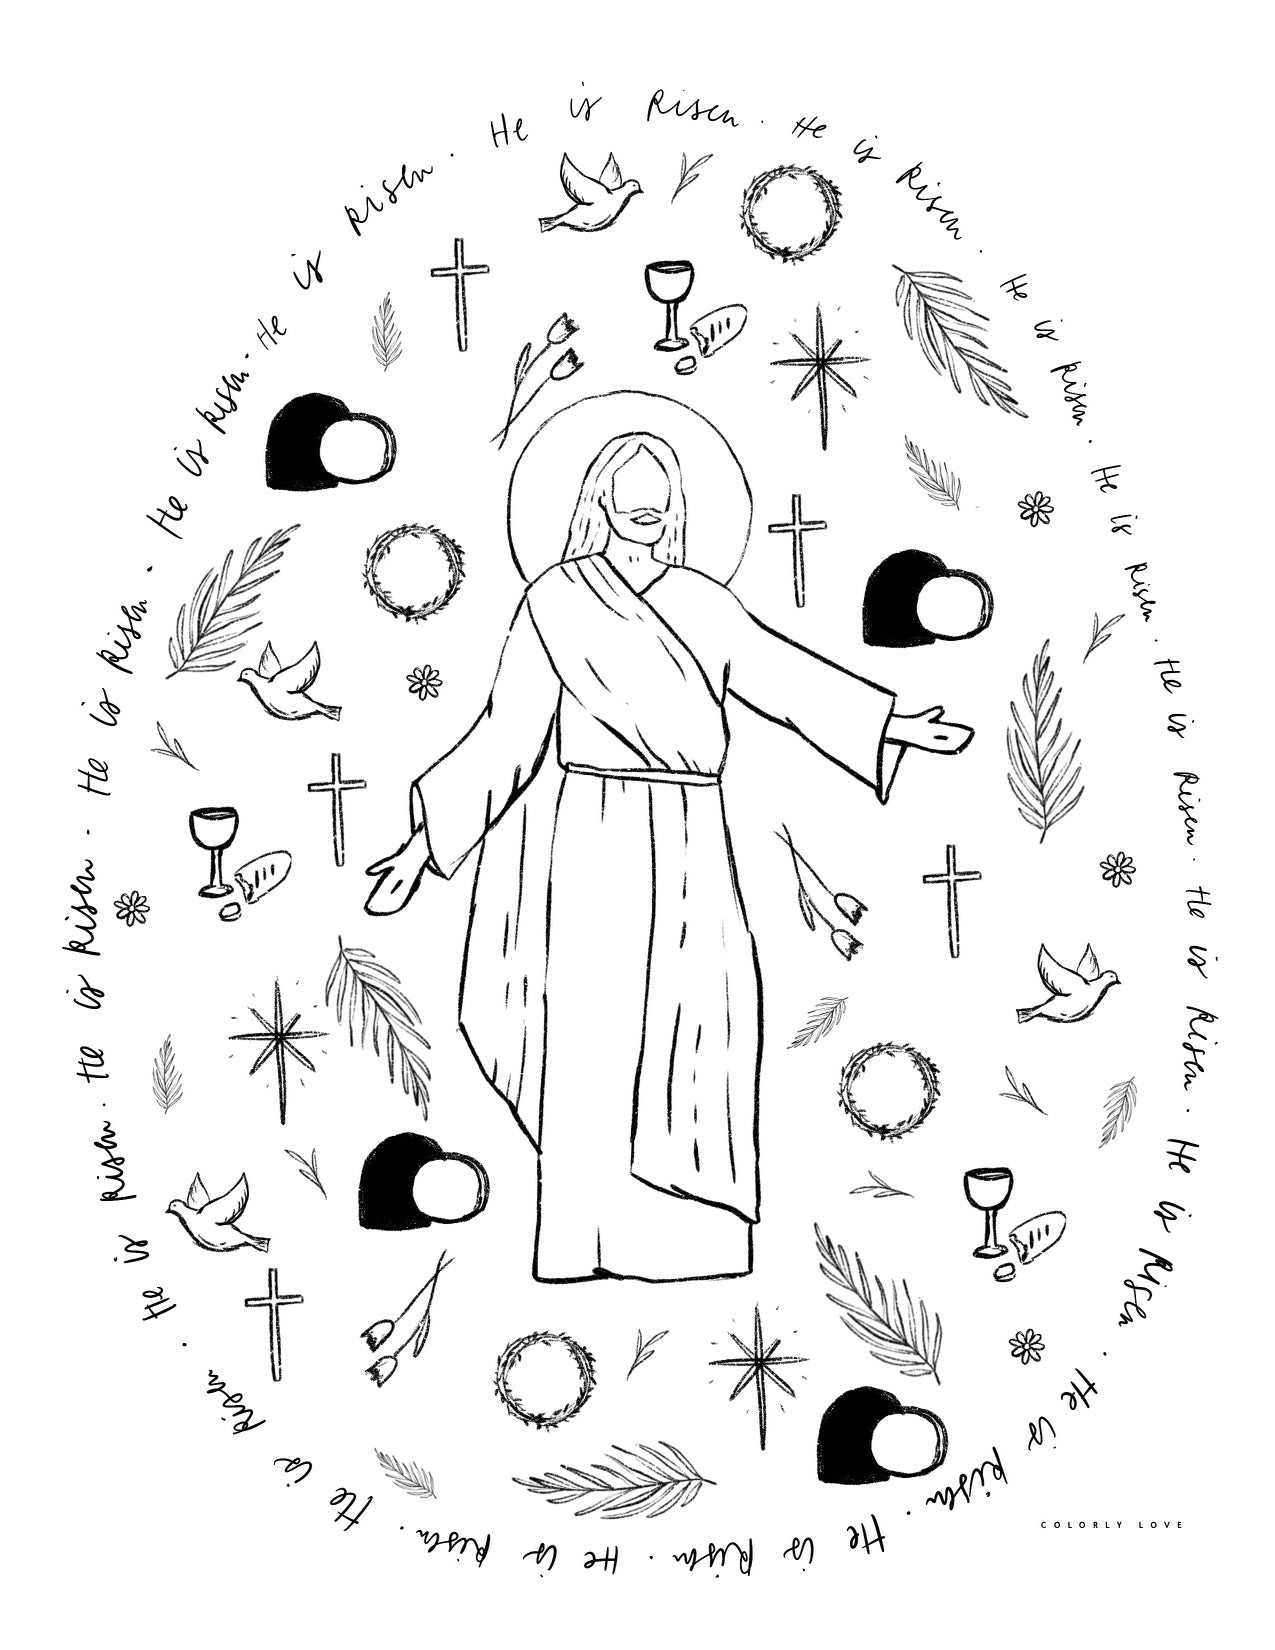 jesus easter coloring pages